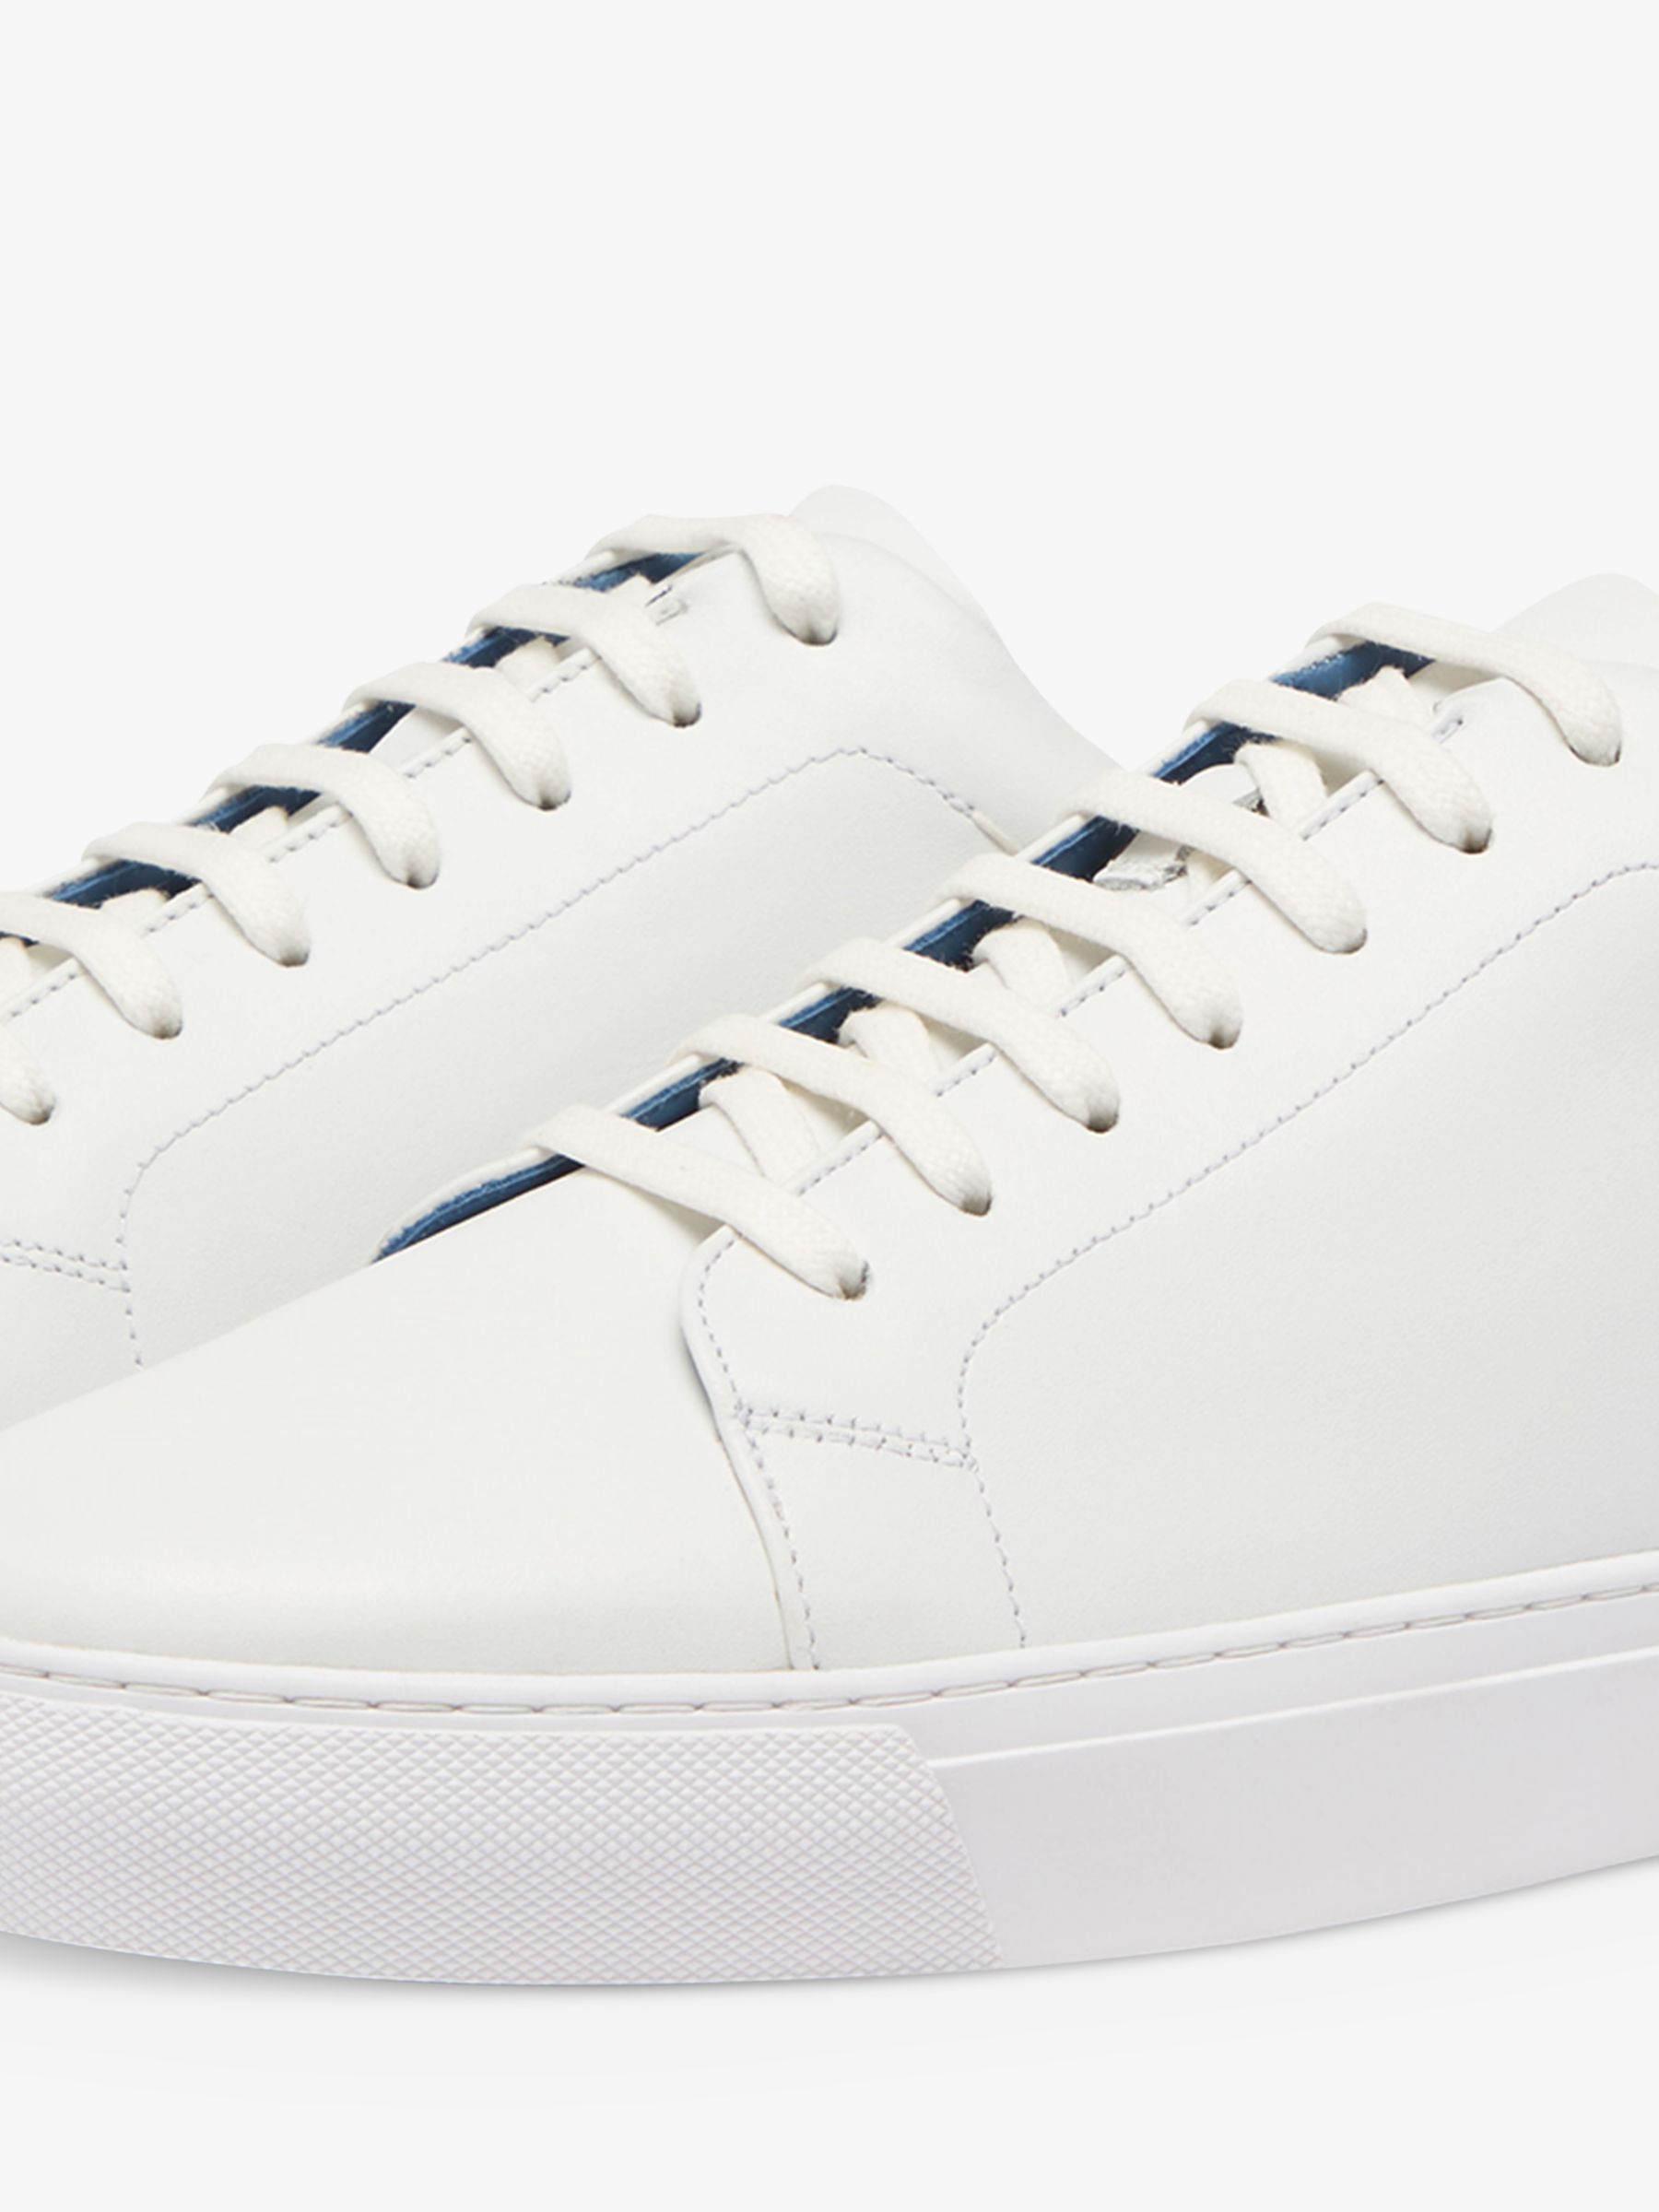 Oliver Sweeney Hayle Leather Trainers, White at John Lewis & Partners